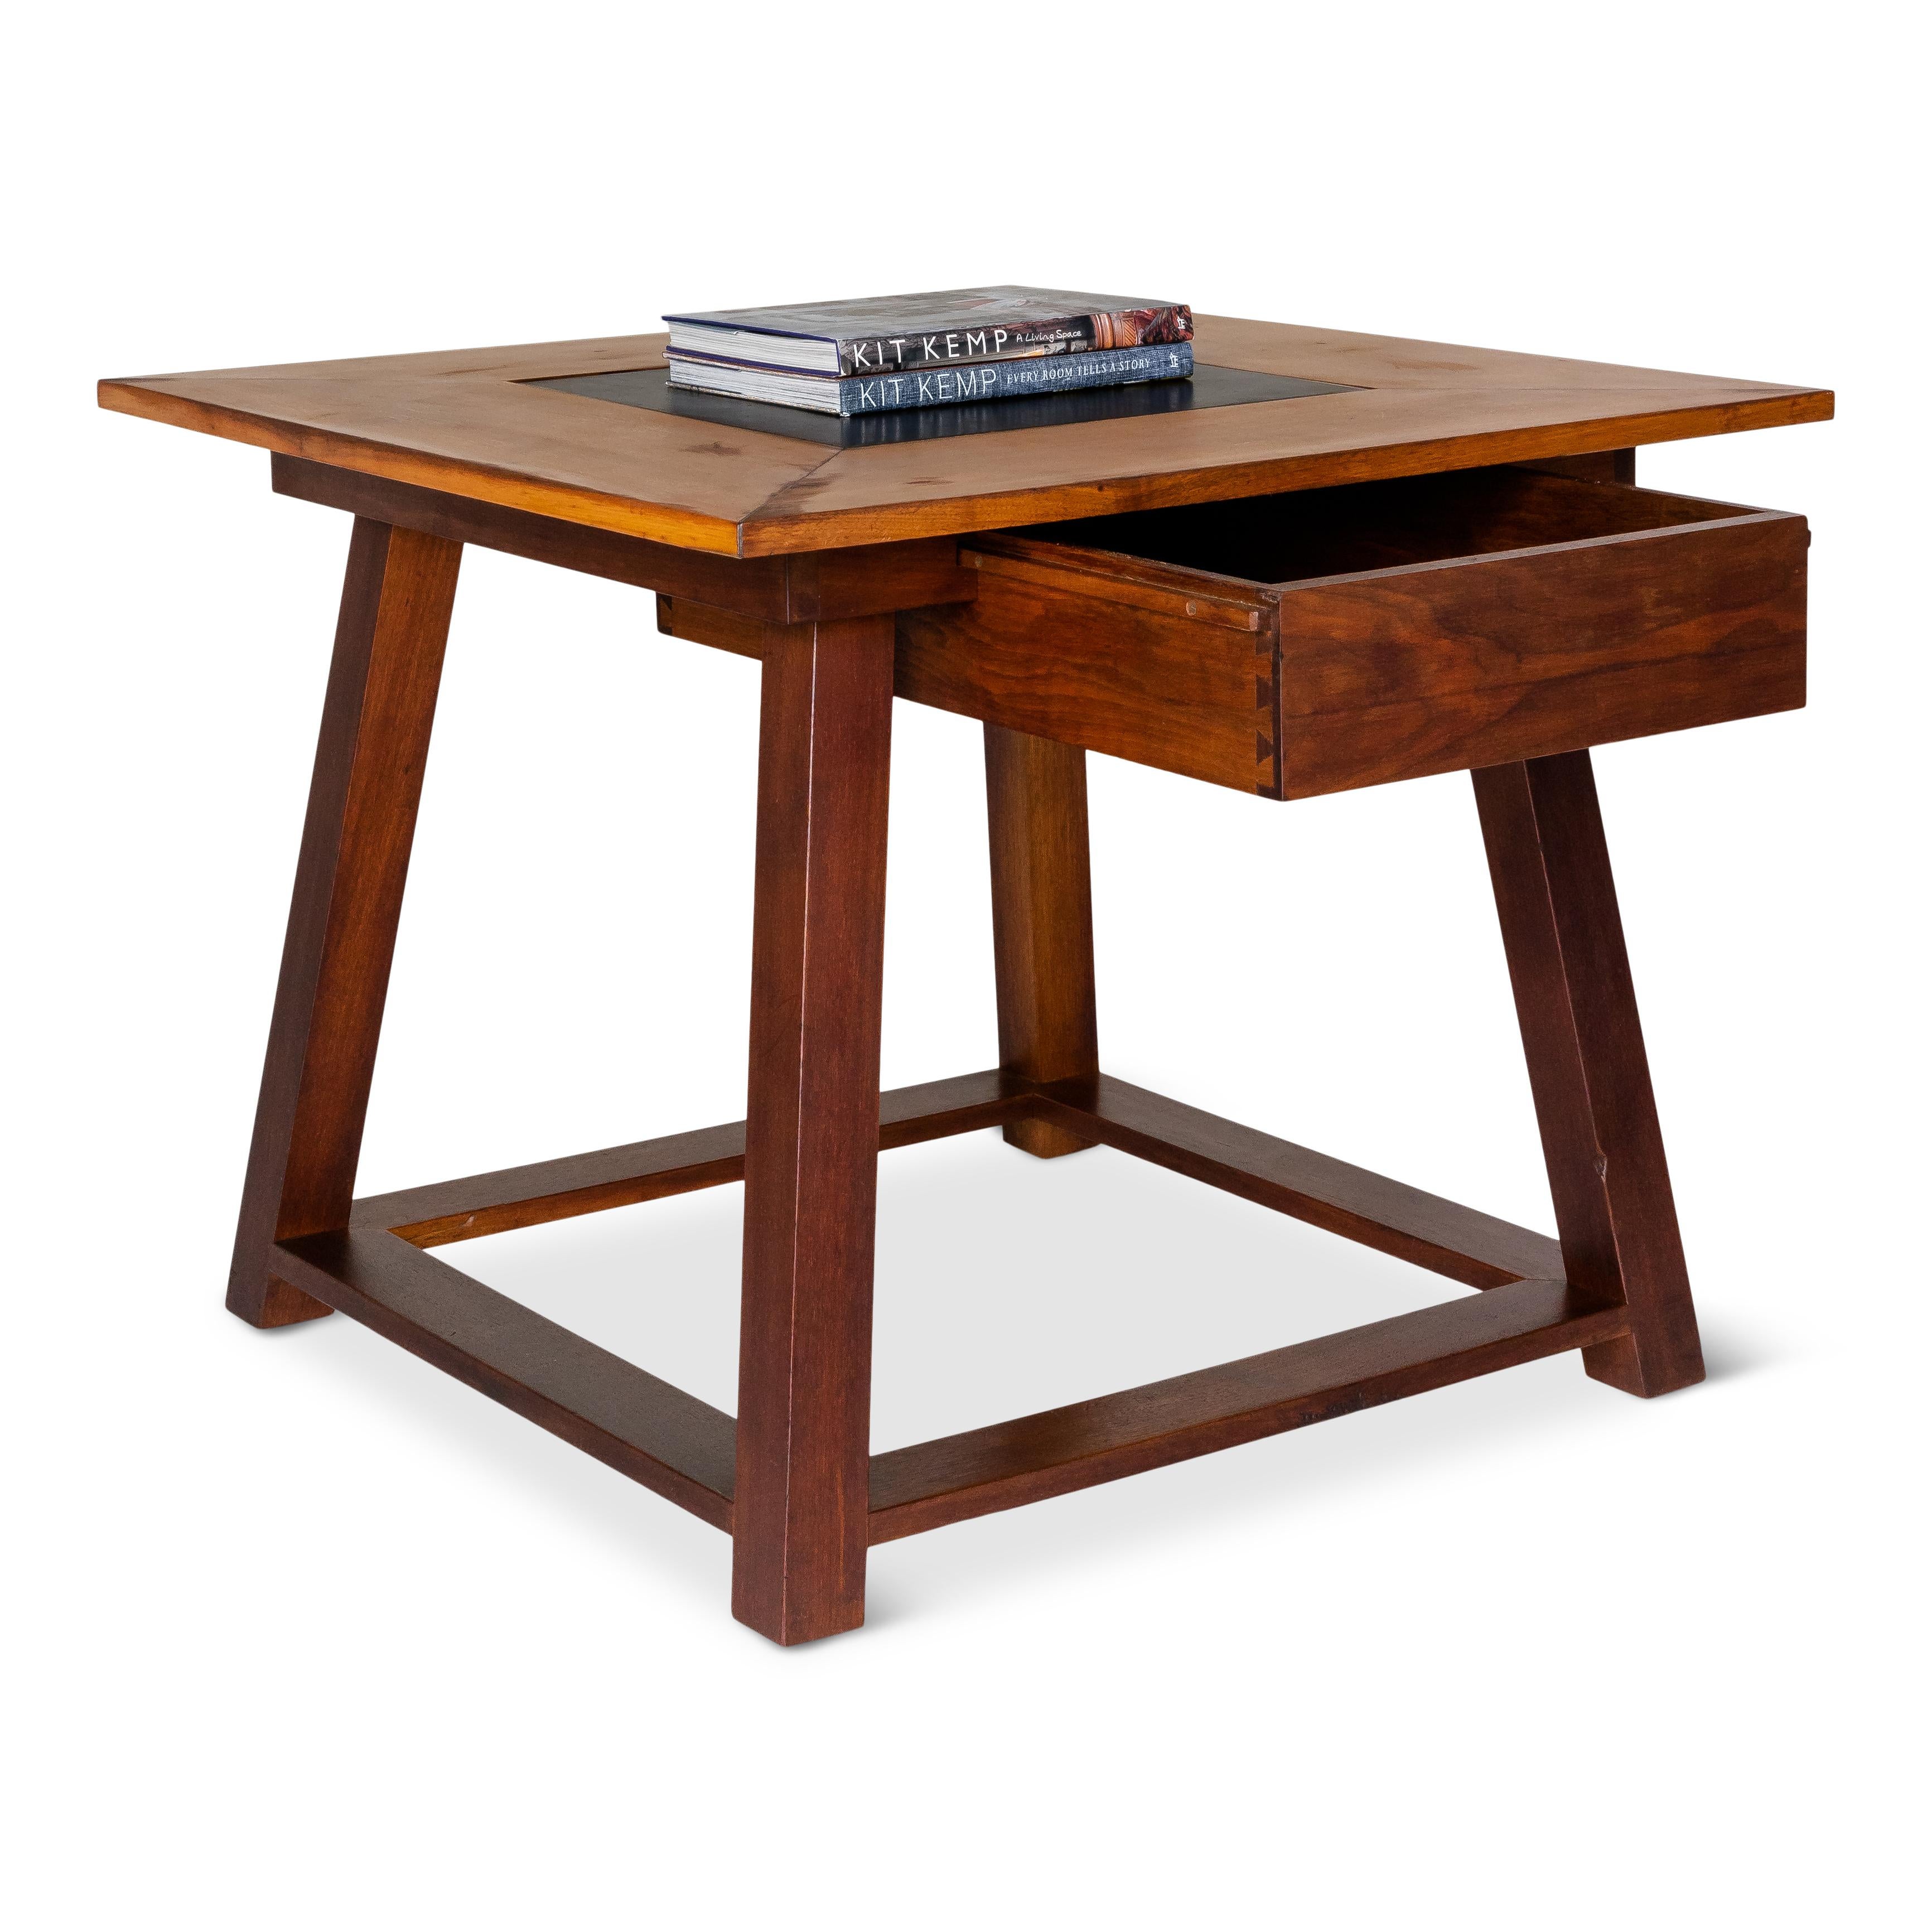 1930's wood architects table with stone inlay and drawer for drawing and drafting supplies.

Piece from our one of a kind collection, Le Monde. Exclusive to Brendan Bass.

Globally curated by Brendan Bass, Le Monde furniture and accessories